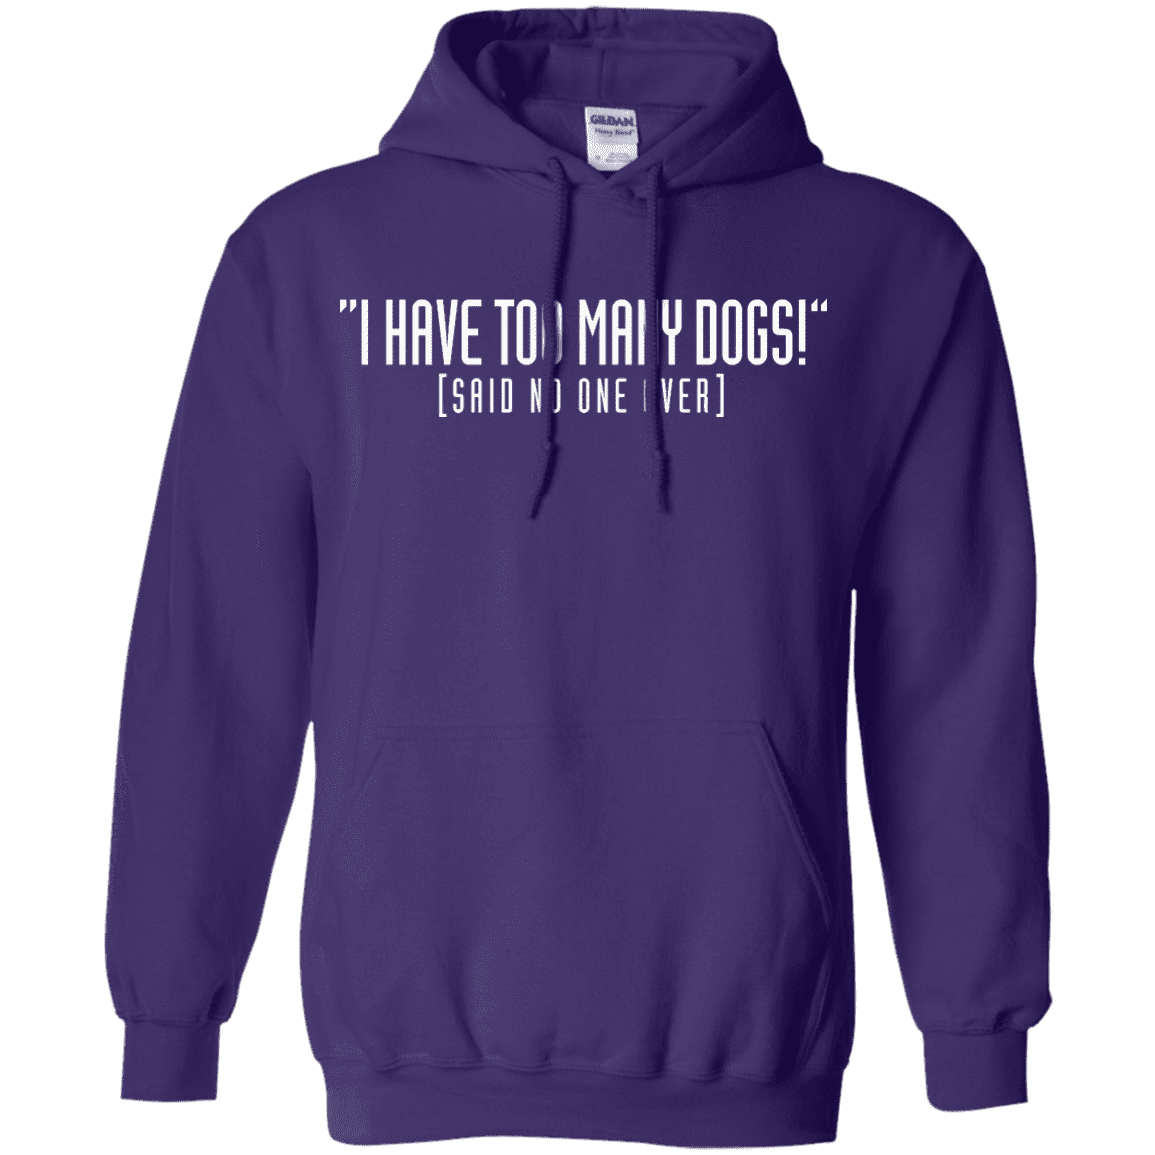 I Have Too Many Dogs - Hoodie.